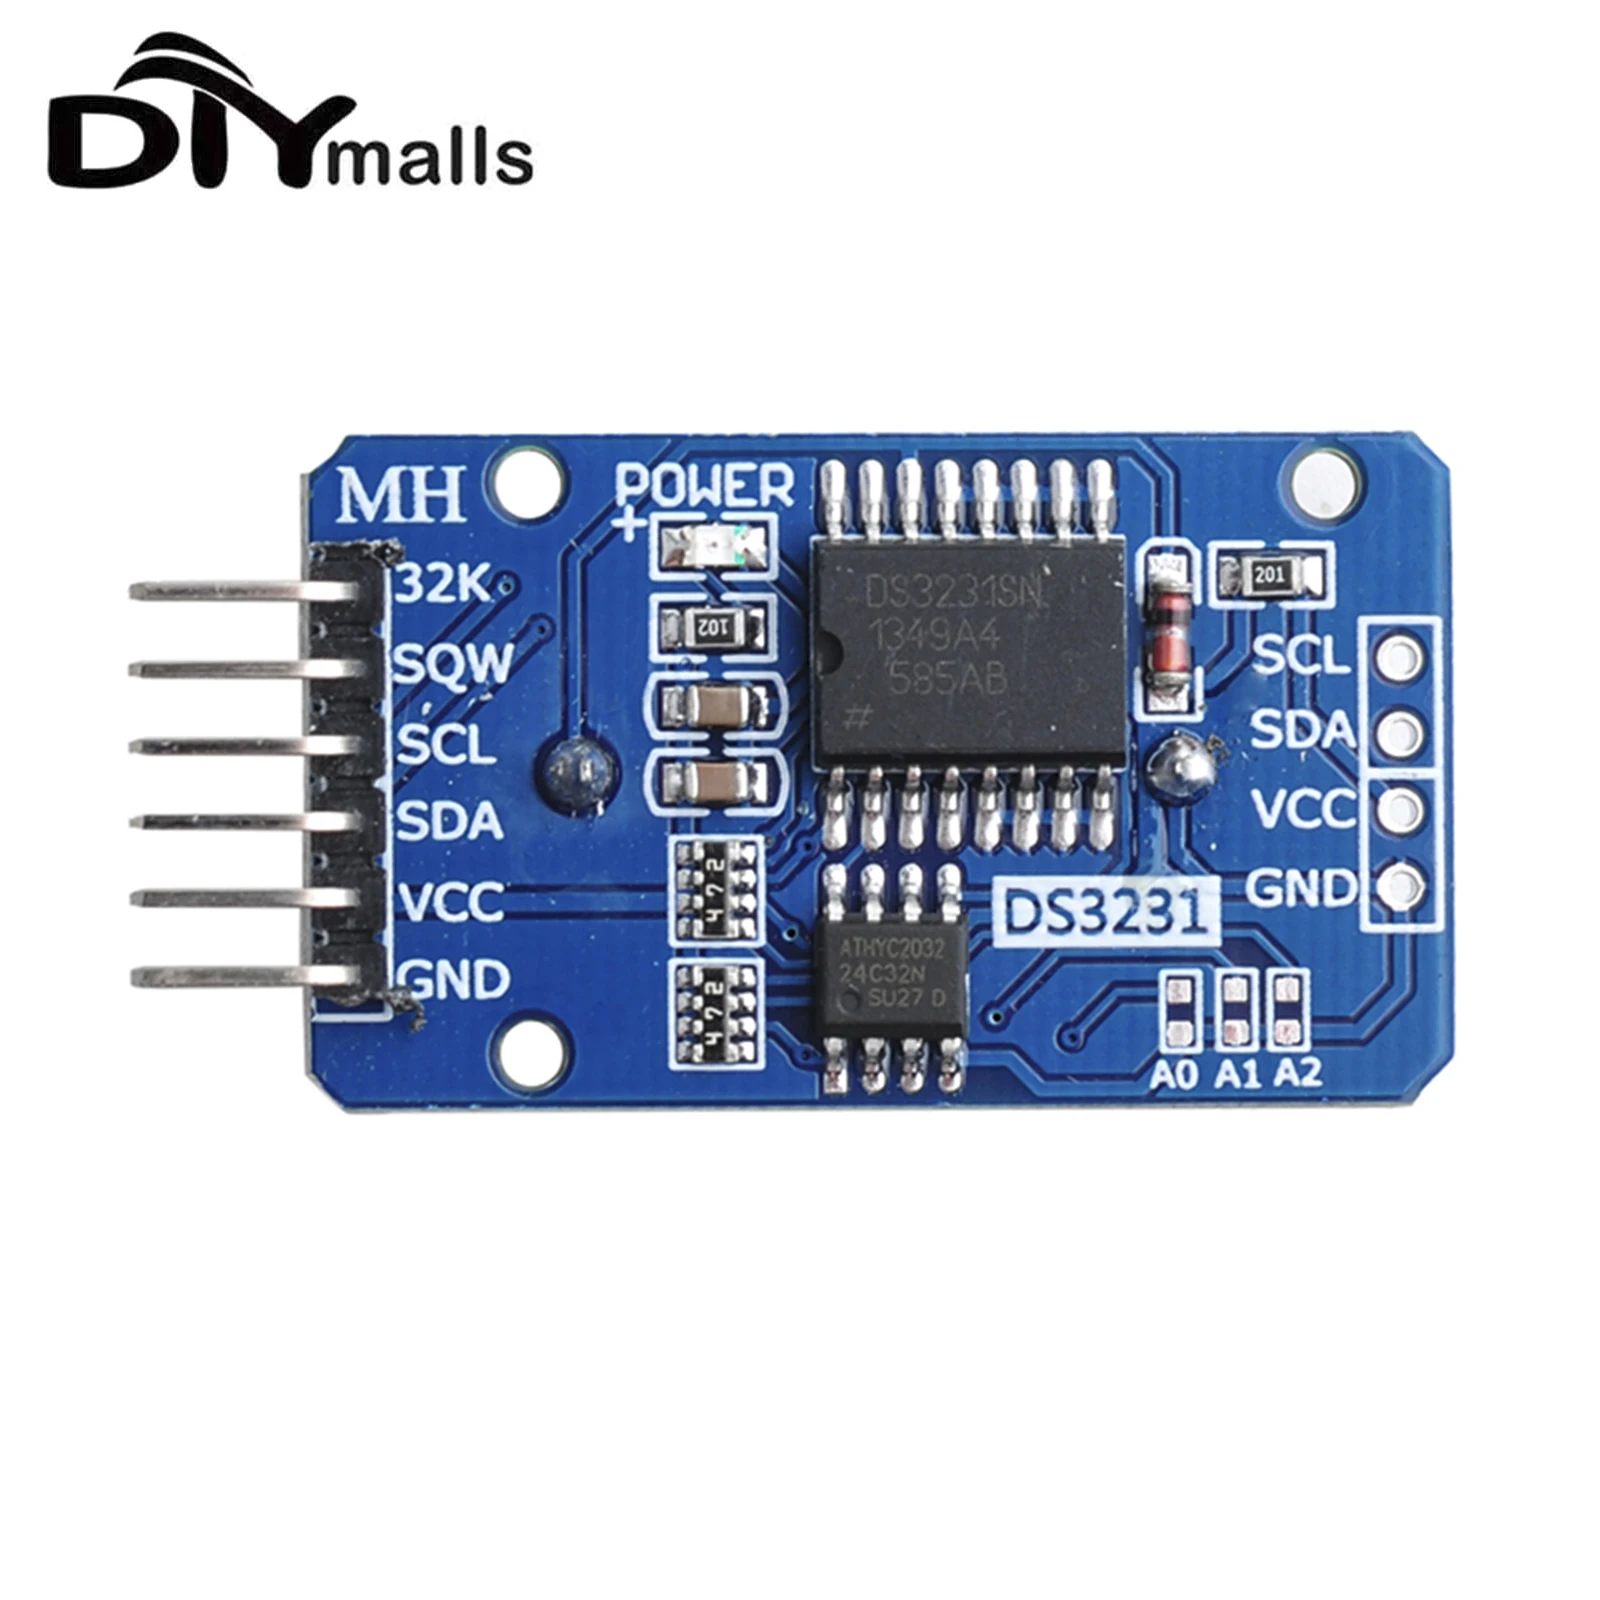 DS3231 AT24C32 IIC Module Precision Clock Module RTC DS3231SN Memory Module for Arduino (without battery) tf luna single point lidar module range finder sensor micro ranging module for arduino pixhawk uart iic with 3 cables